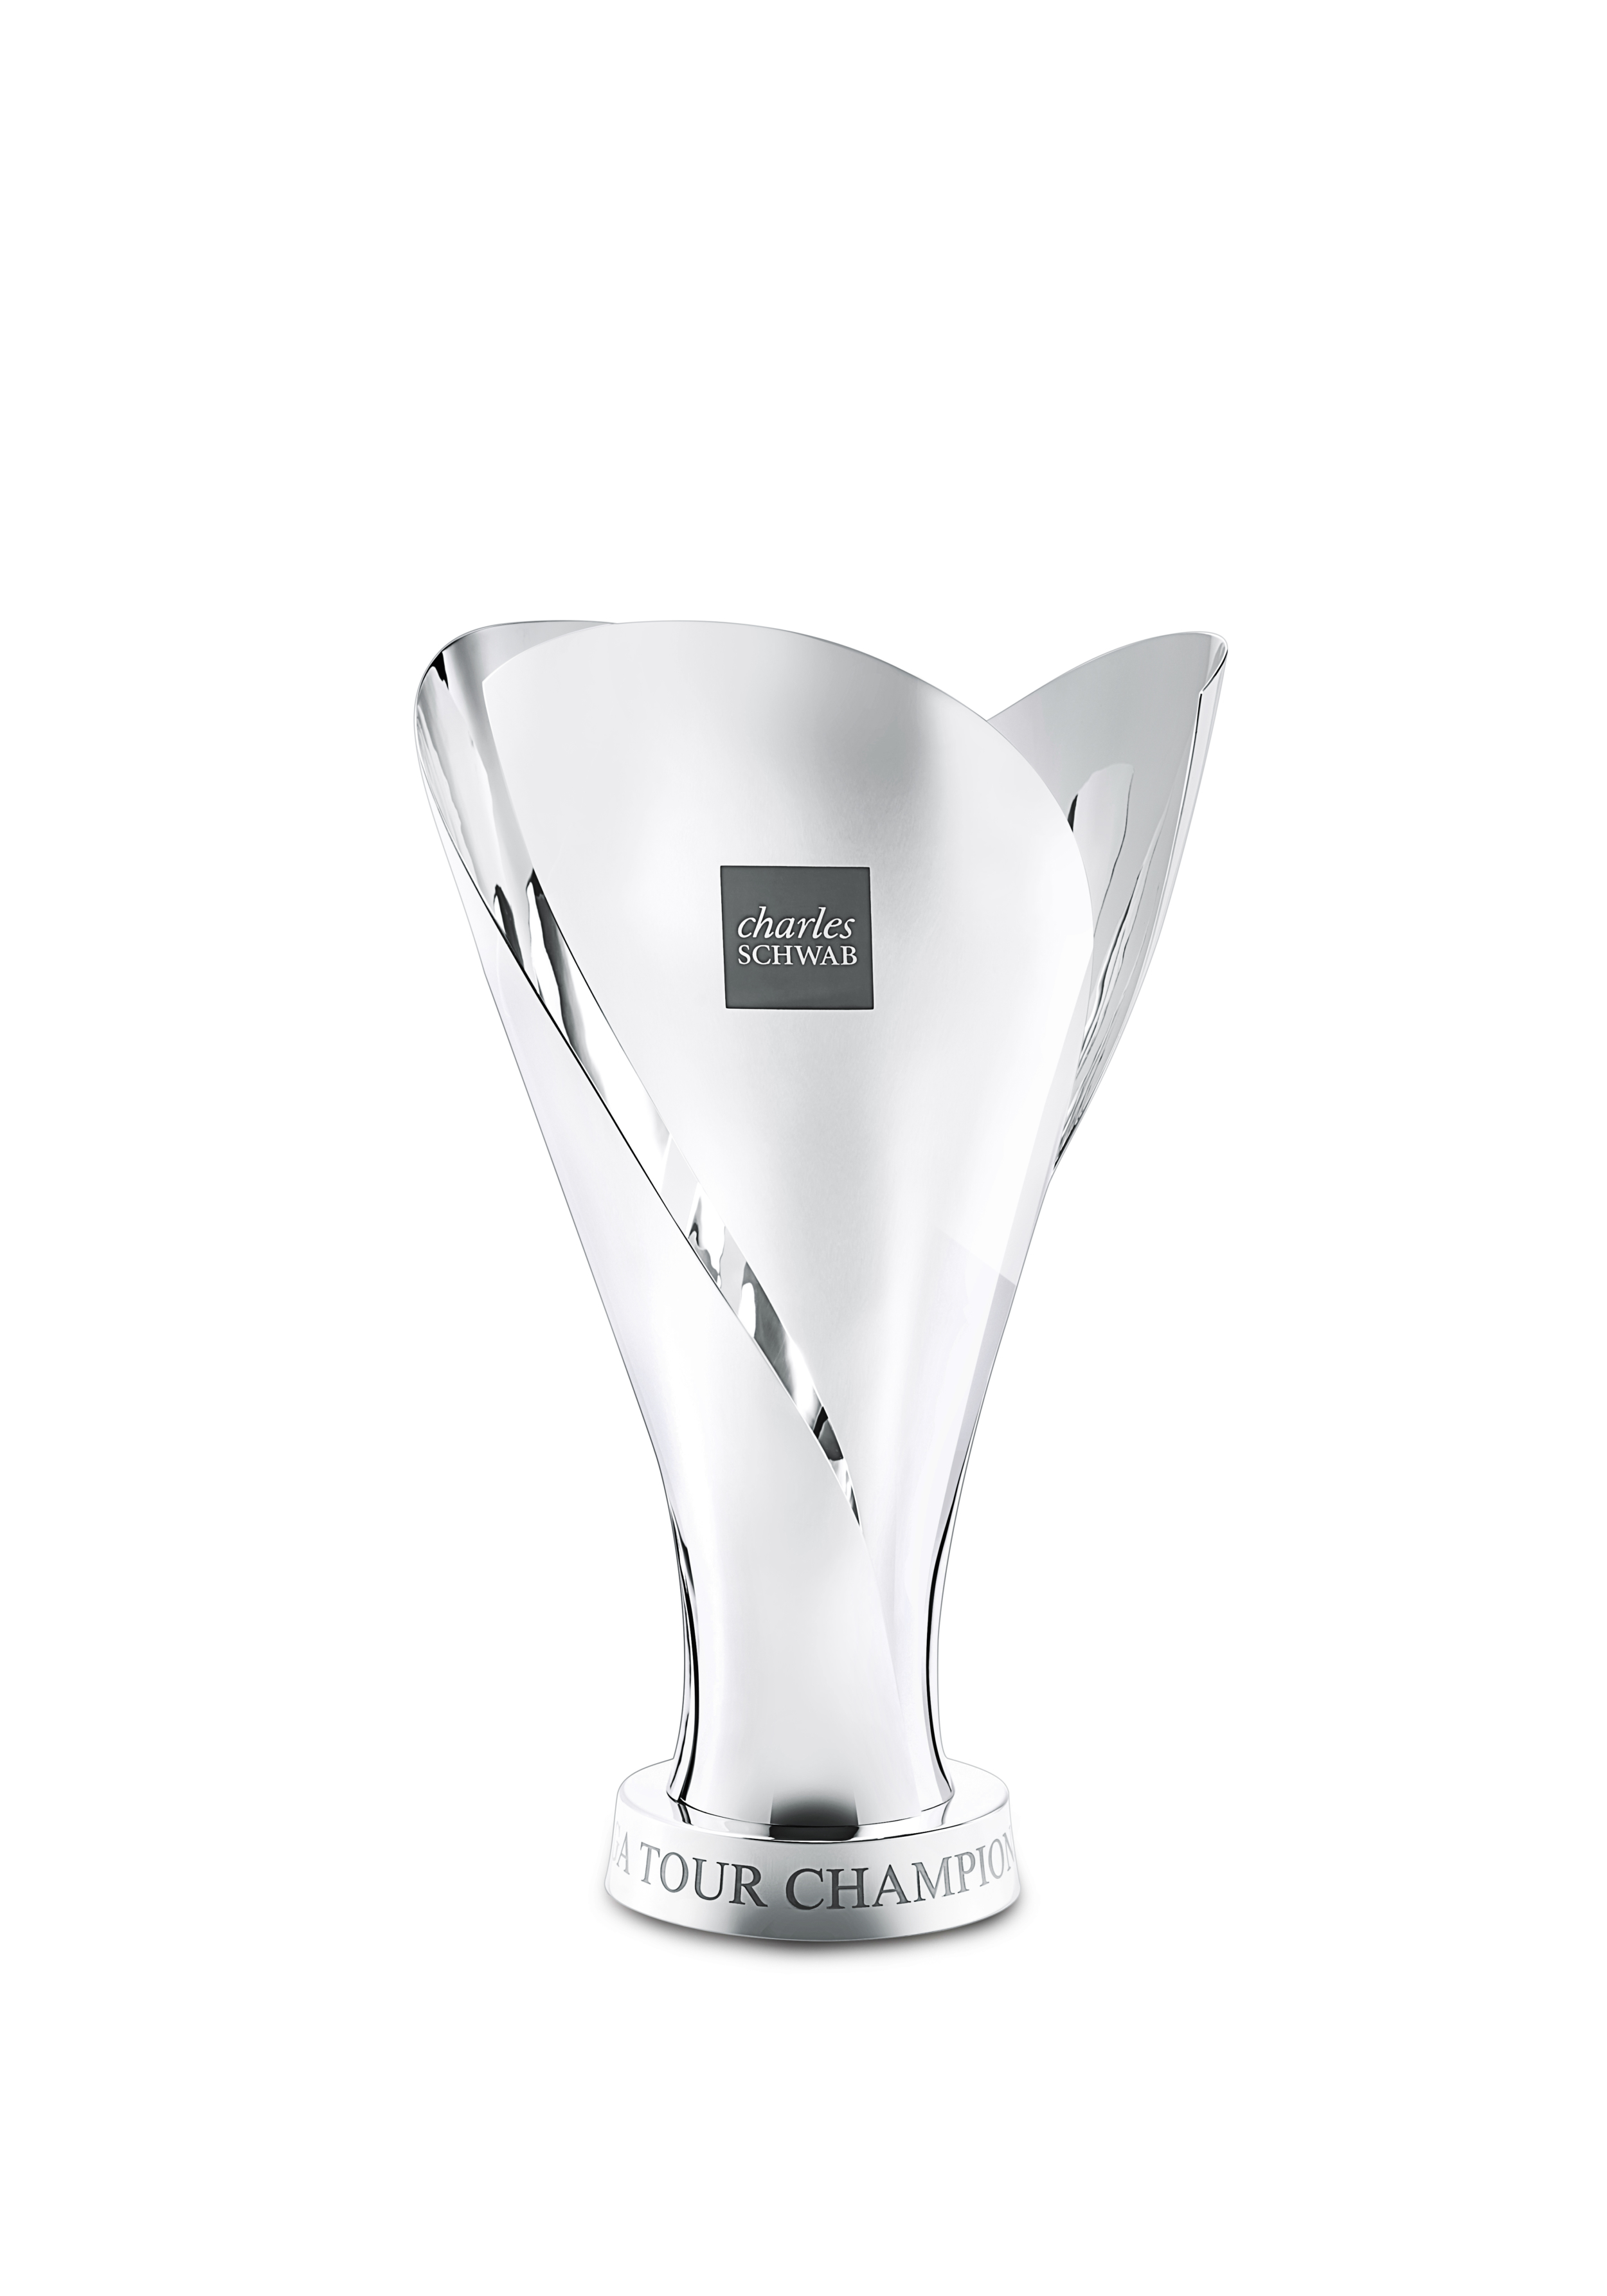 The Charles Schwab Cup Championship Trophy for the PGA TOUR® season